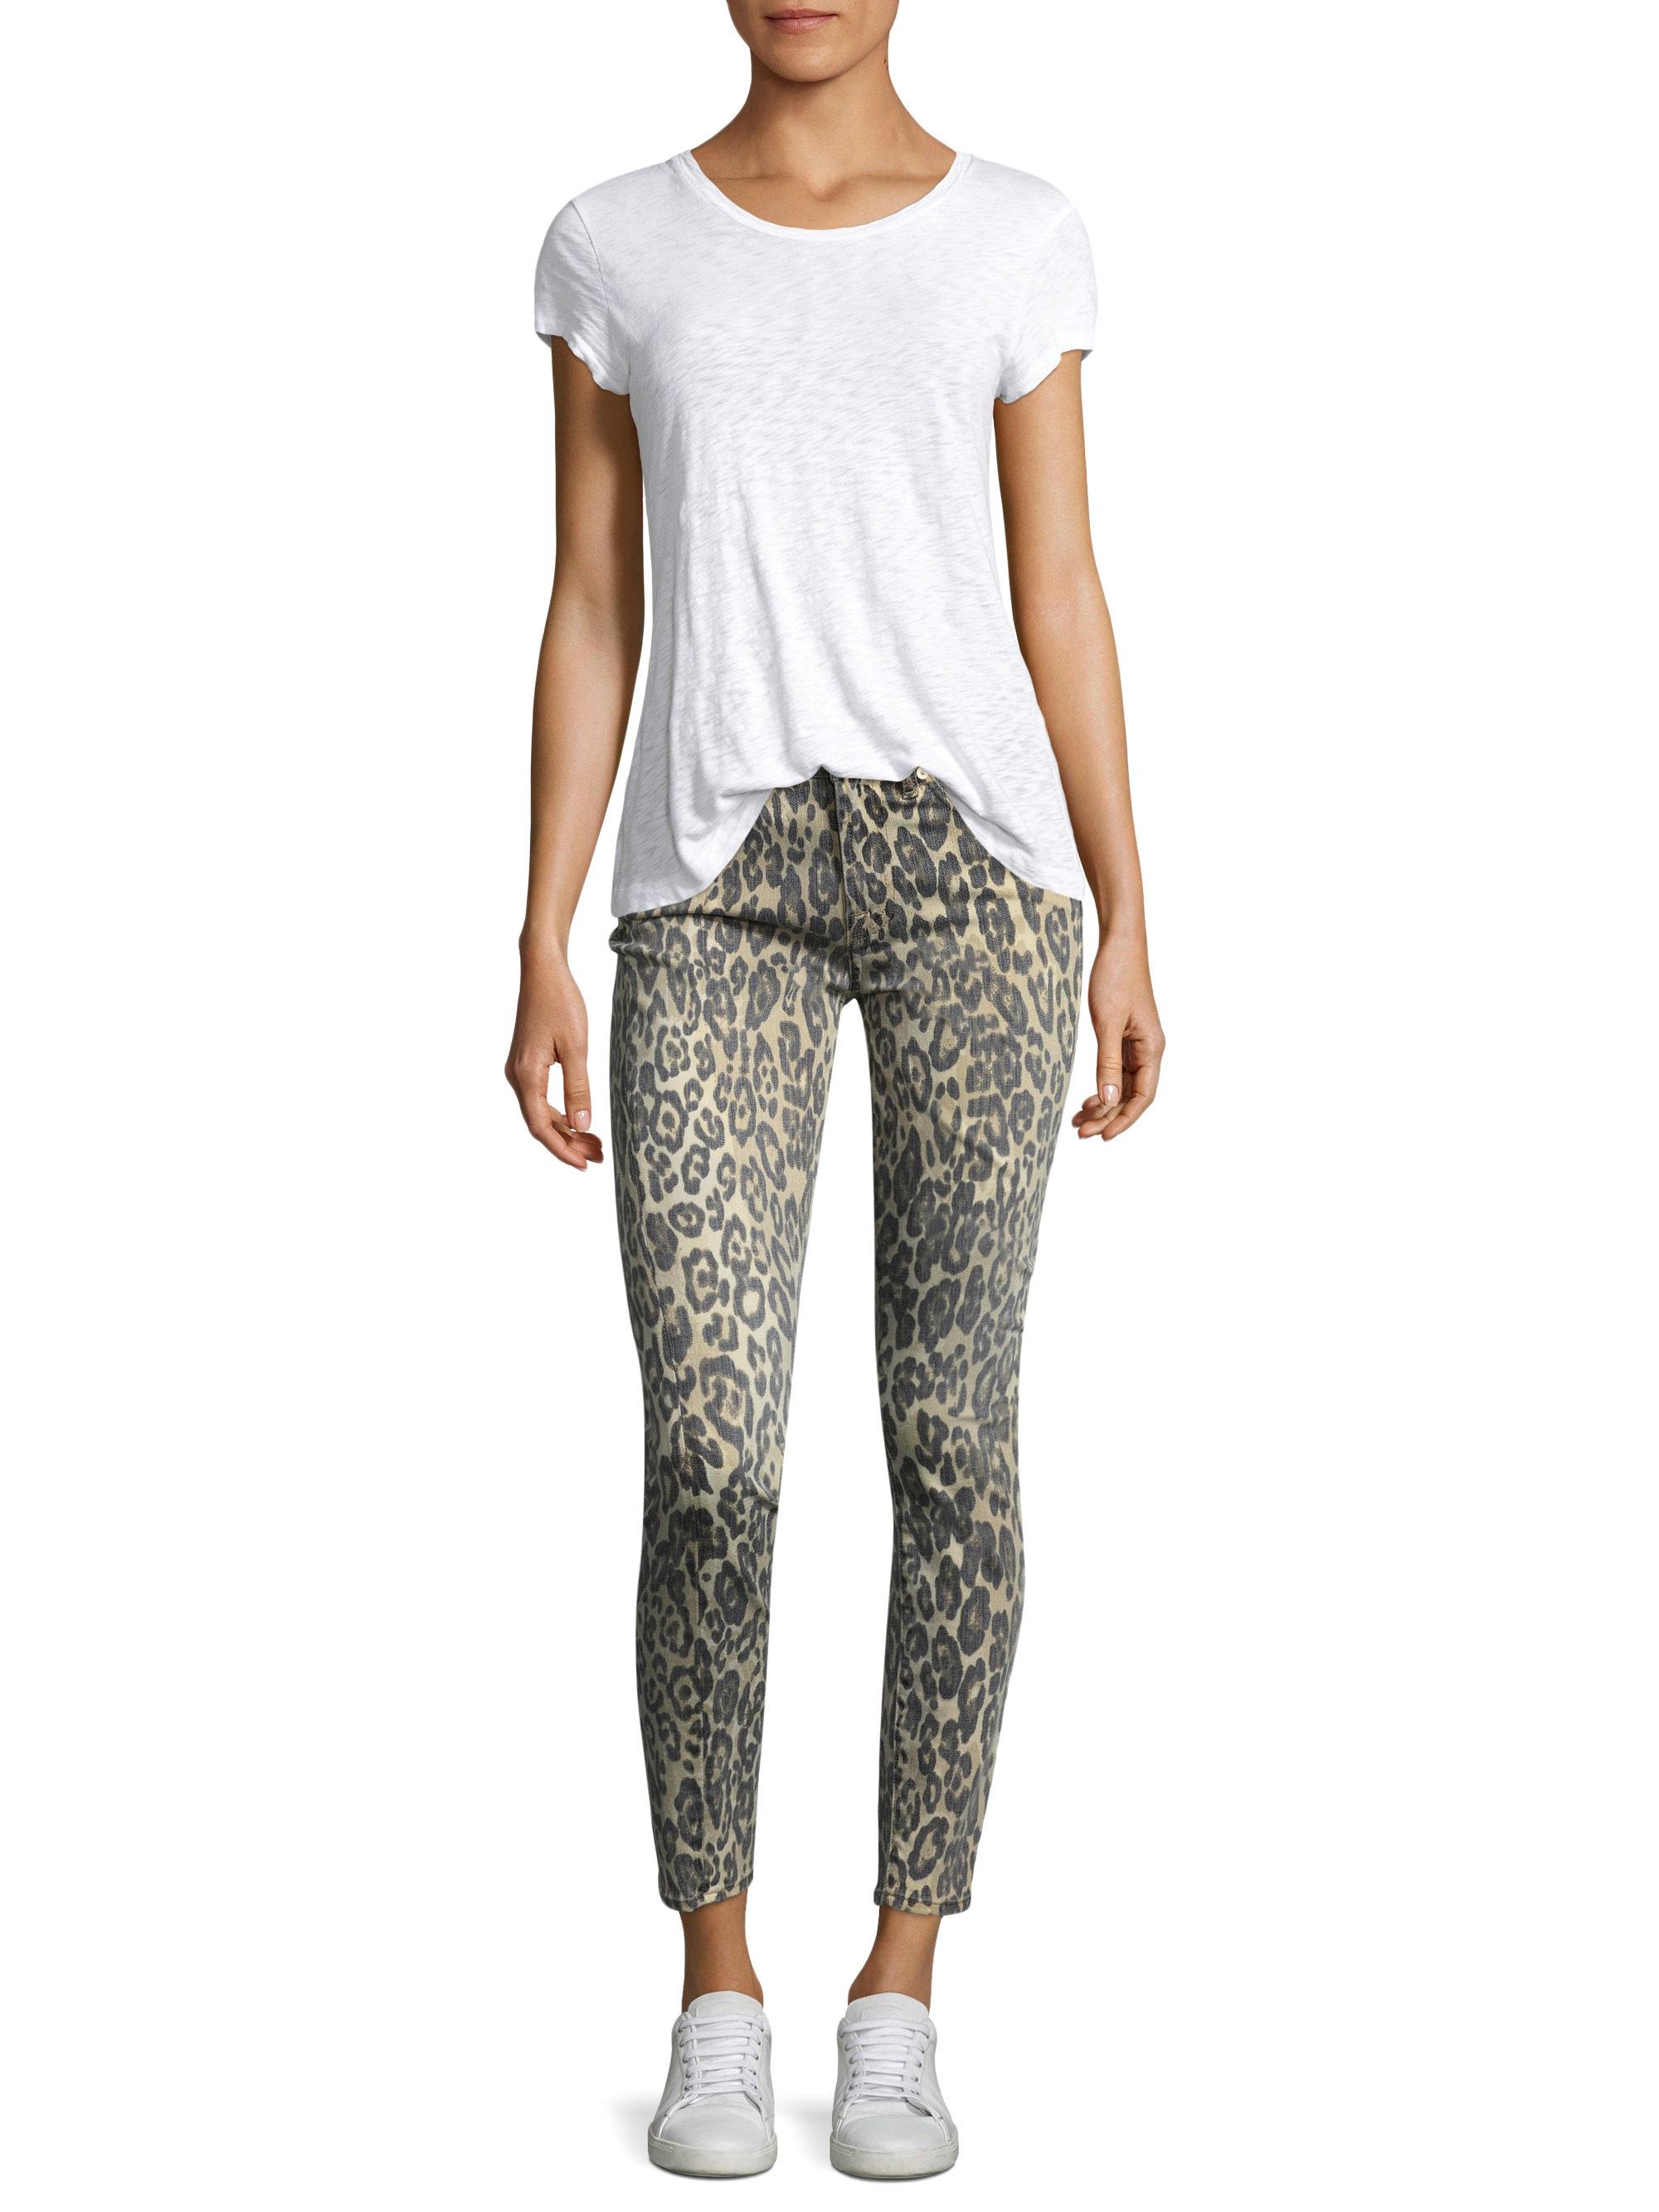 7 For All Mankind Denim Cheetah Print Jeans in Beige (Natural) | Lyst